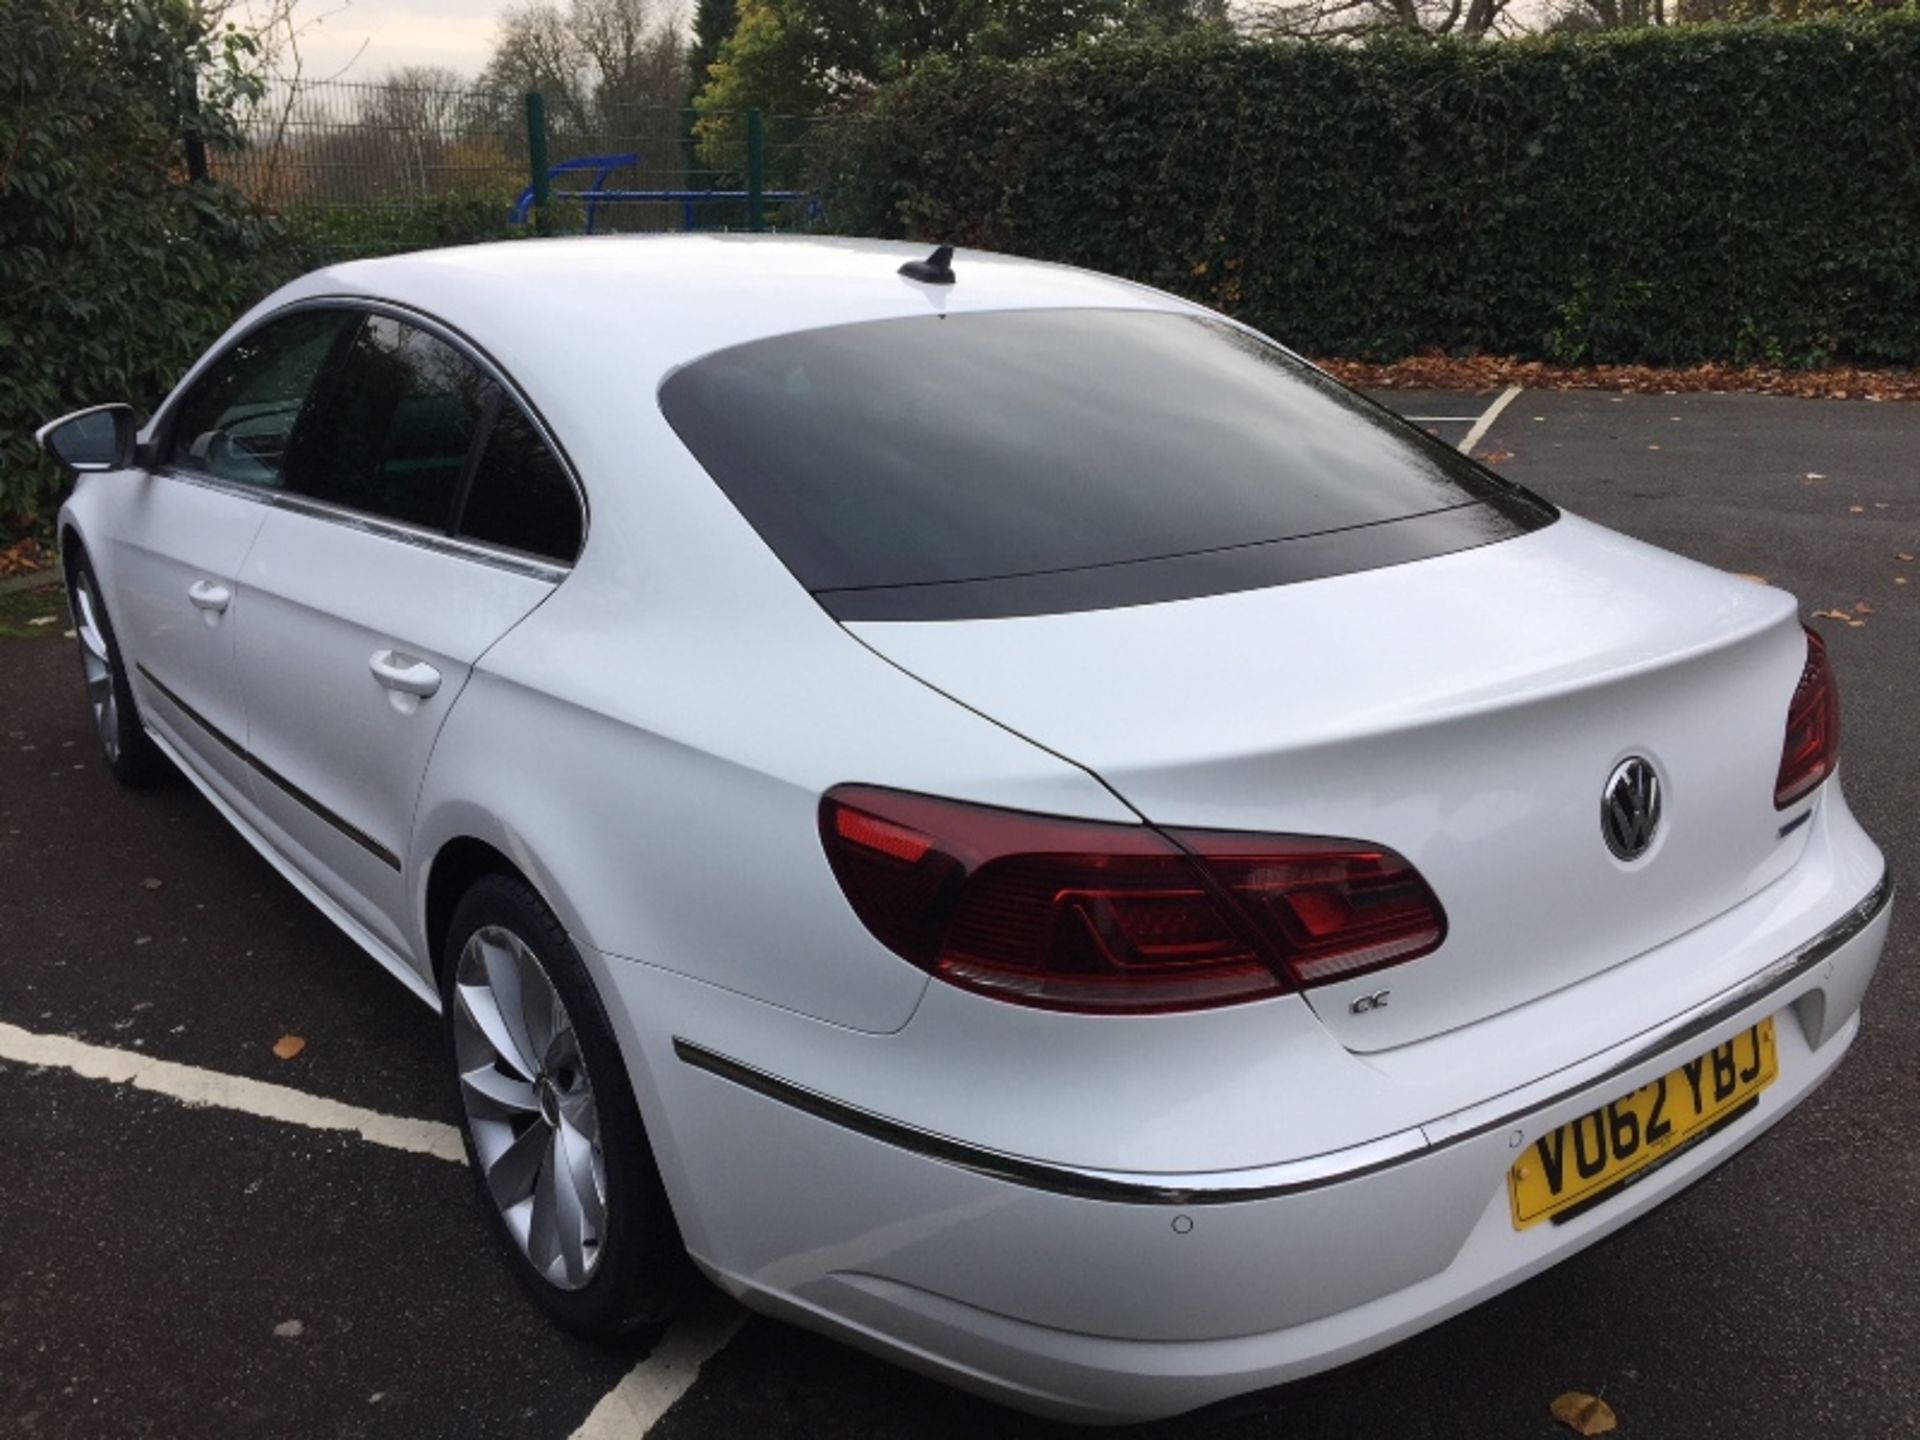 VO62 YBJ: Volkswagen CC 2.0 GT Bluemotion Techn TD Coupe in White. - Image 7 of 27